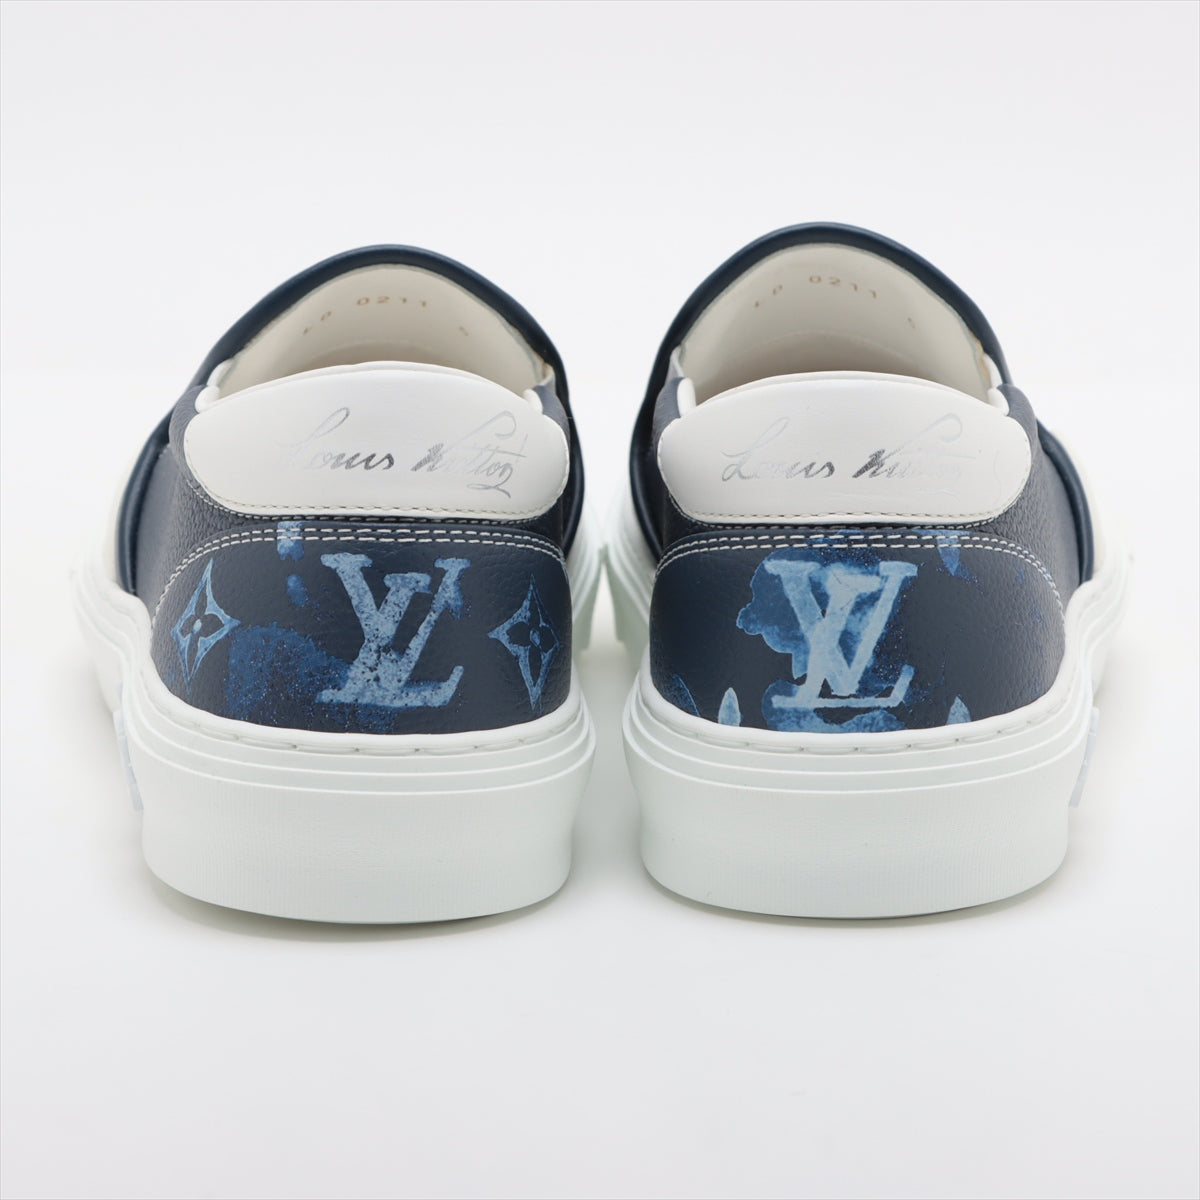 Louis Vuitton LV Original Line 21 Year PVC  Leather Slippon 5  Navyx × White LD0211 Monogram Insole Marked Family Selling Goods